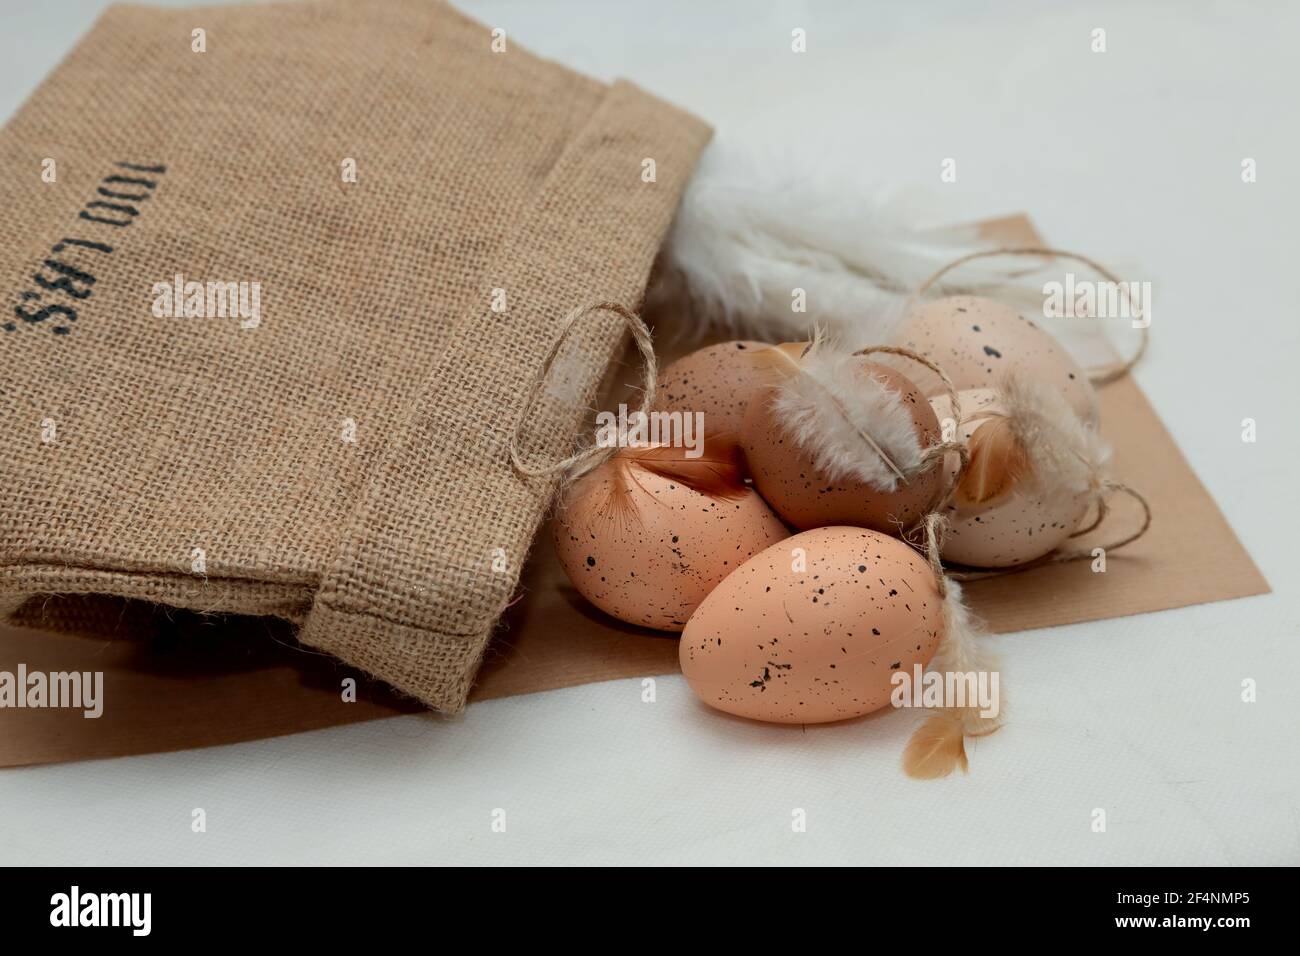 Brown easter eggs with feathers with a cardboard box on a table Stock Photo